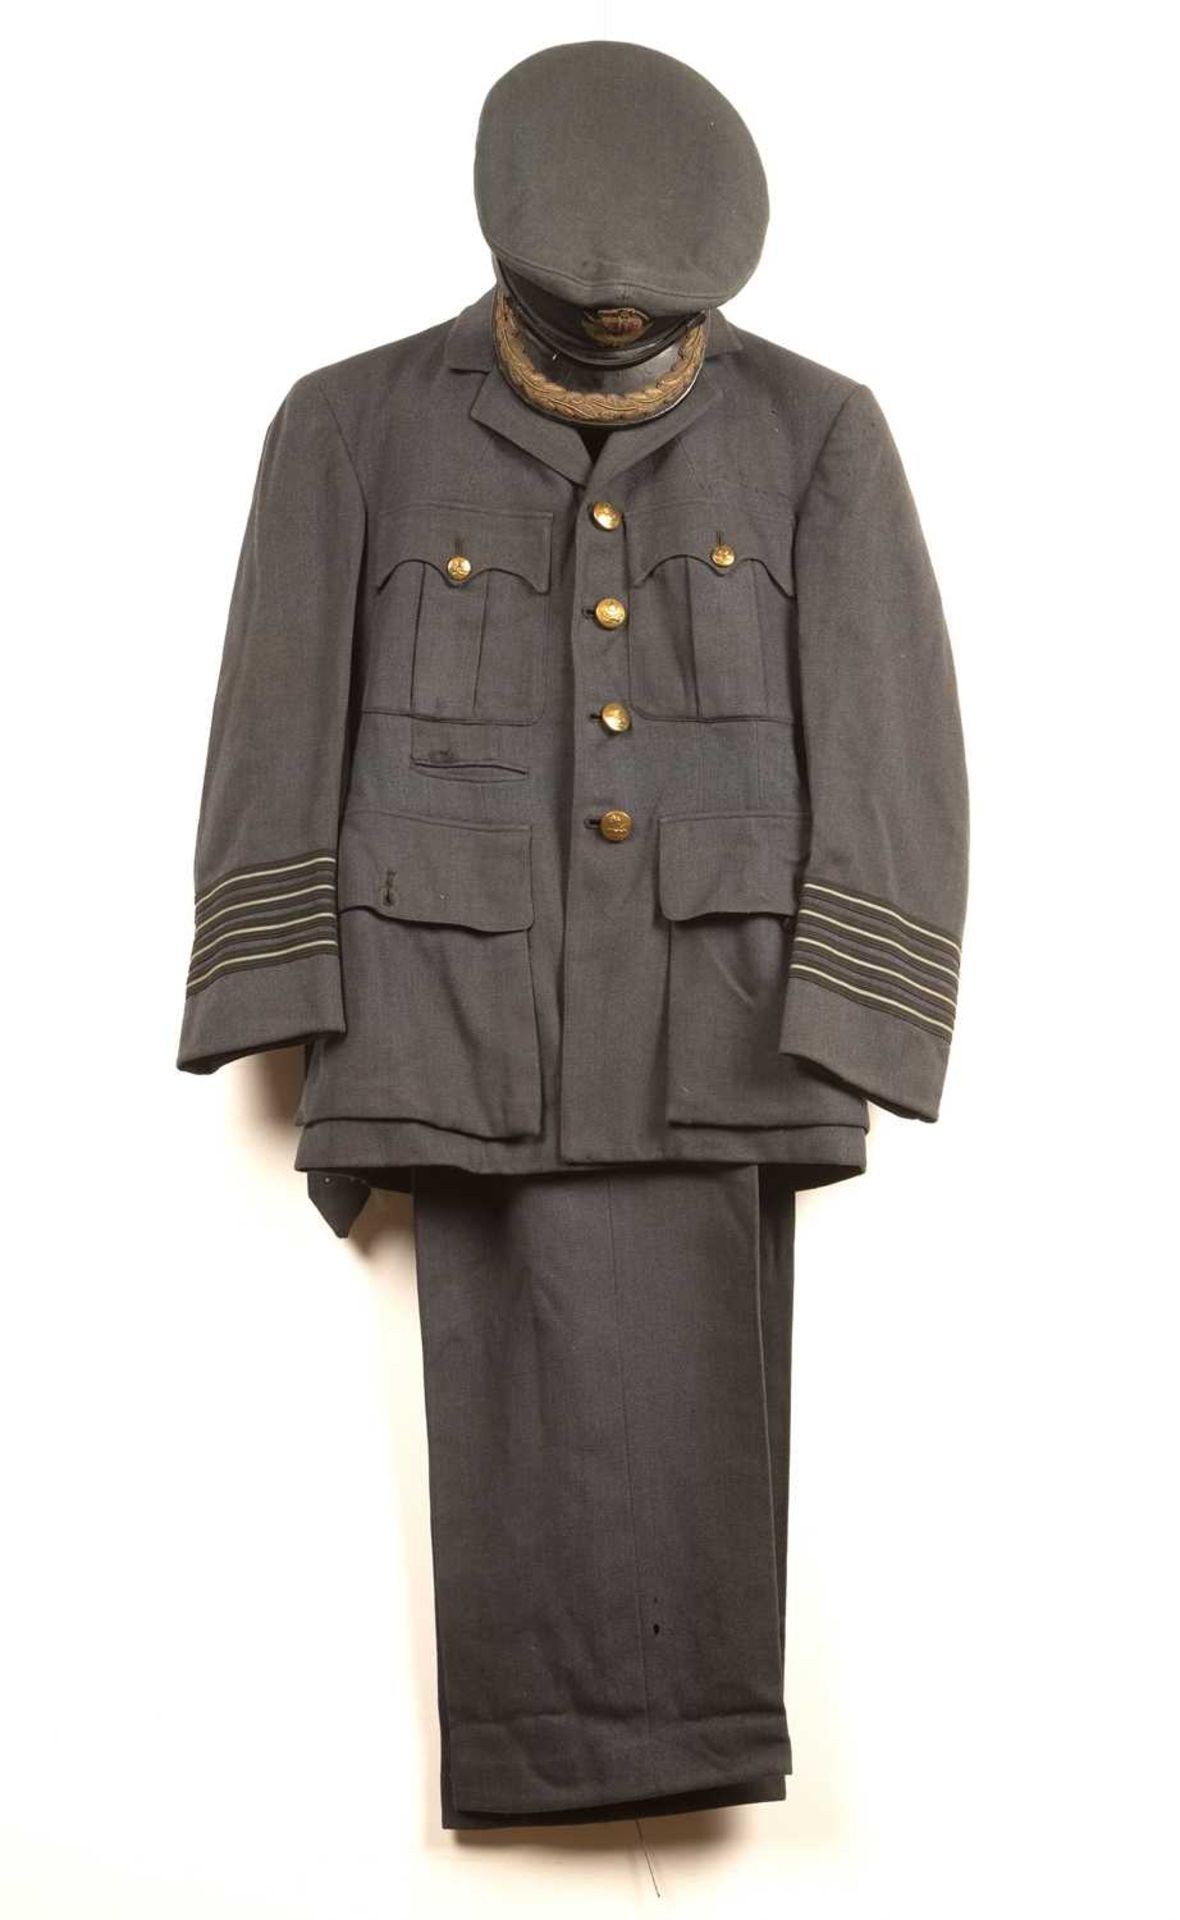 Military Interest Burberrys RAF military uniform, with matching hat and other caps, a gentleman's